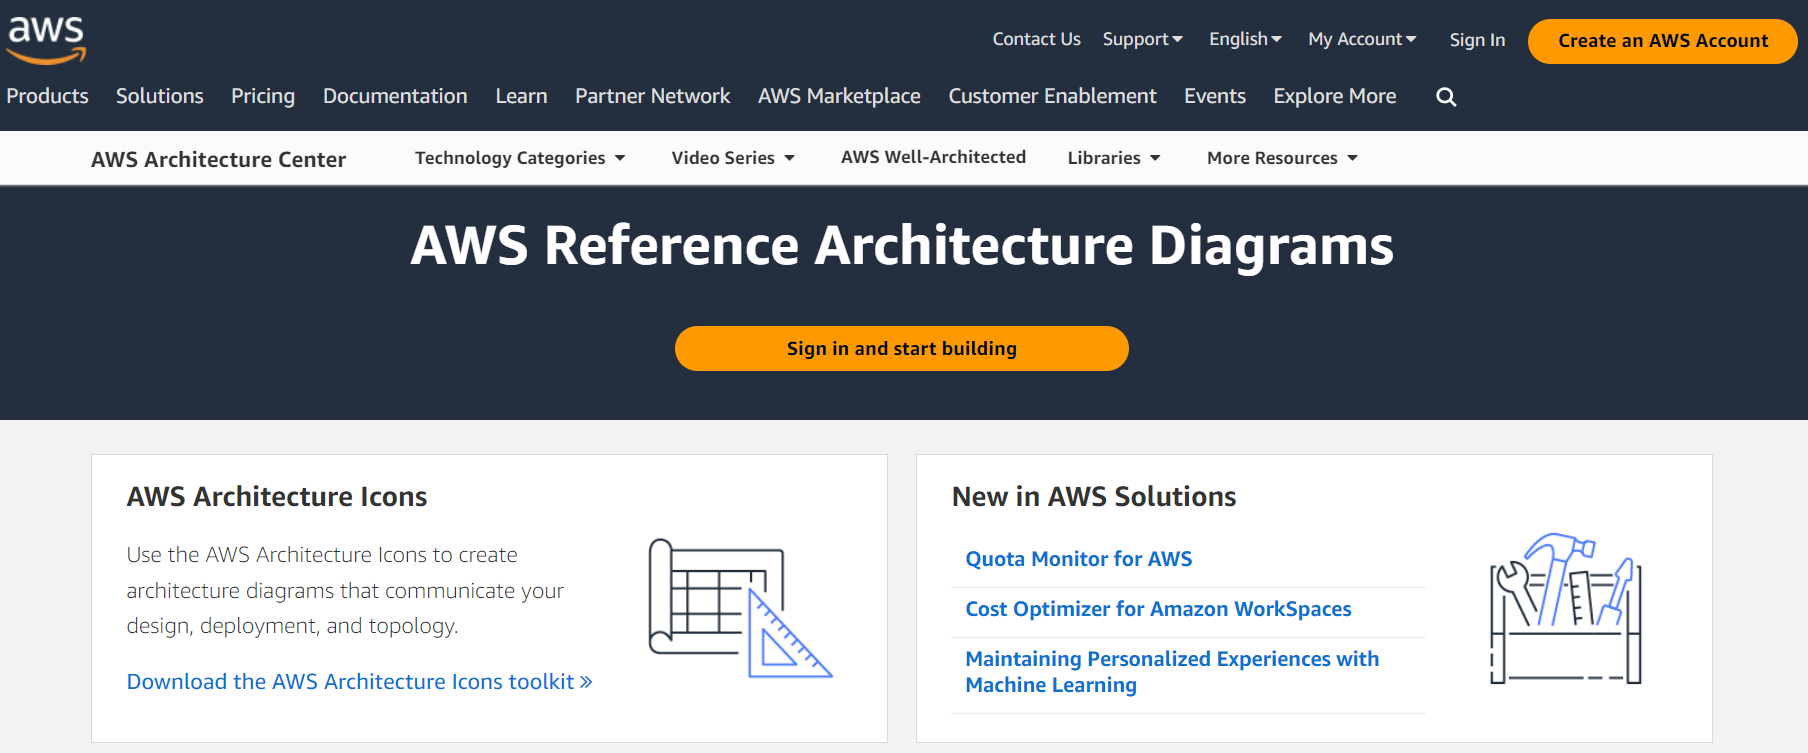 AWS Reference Architecture Diagrams